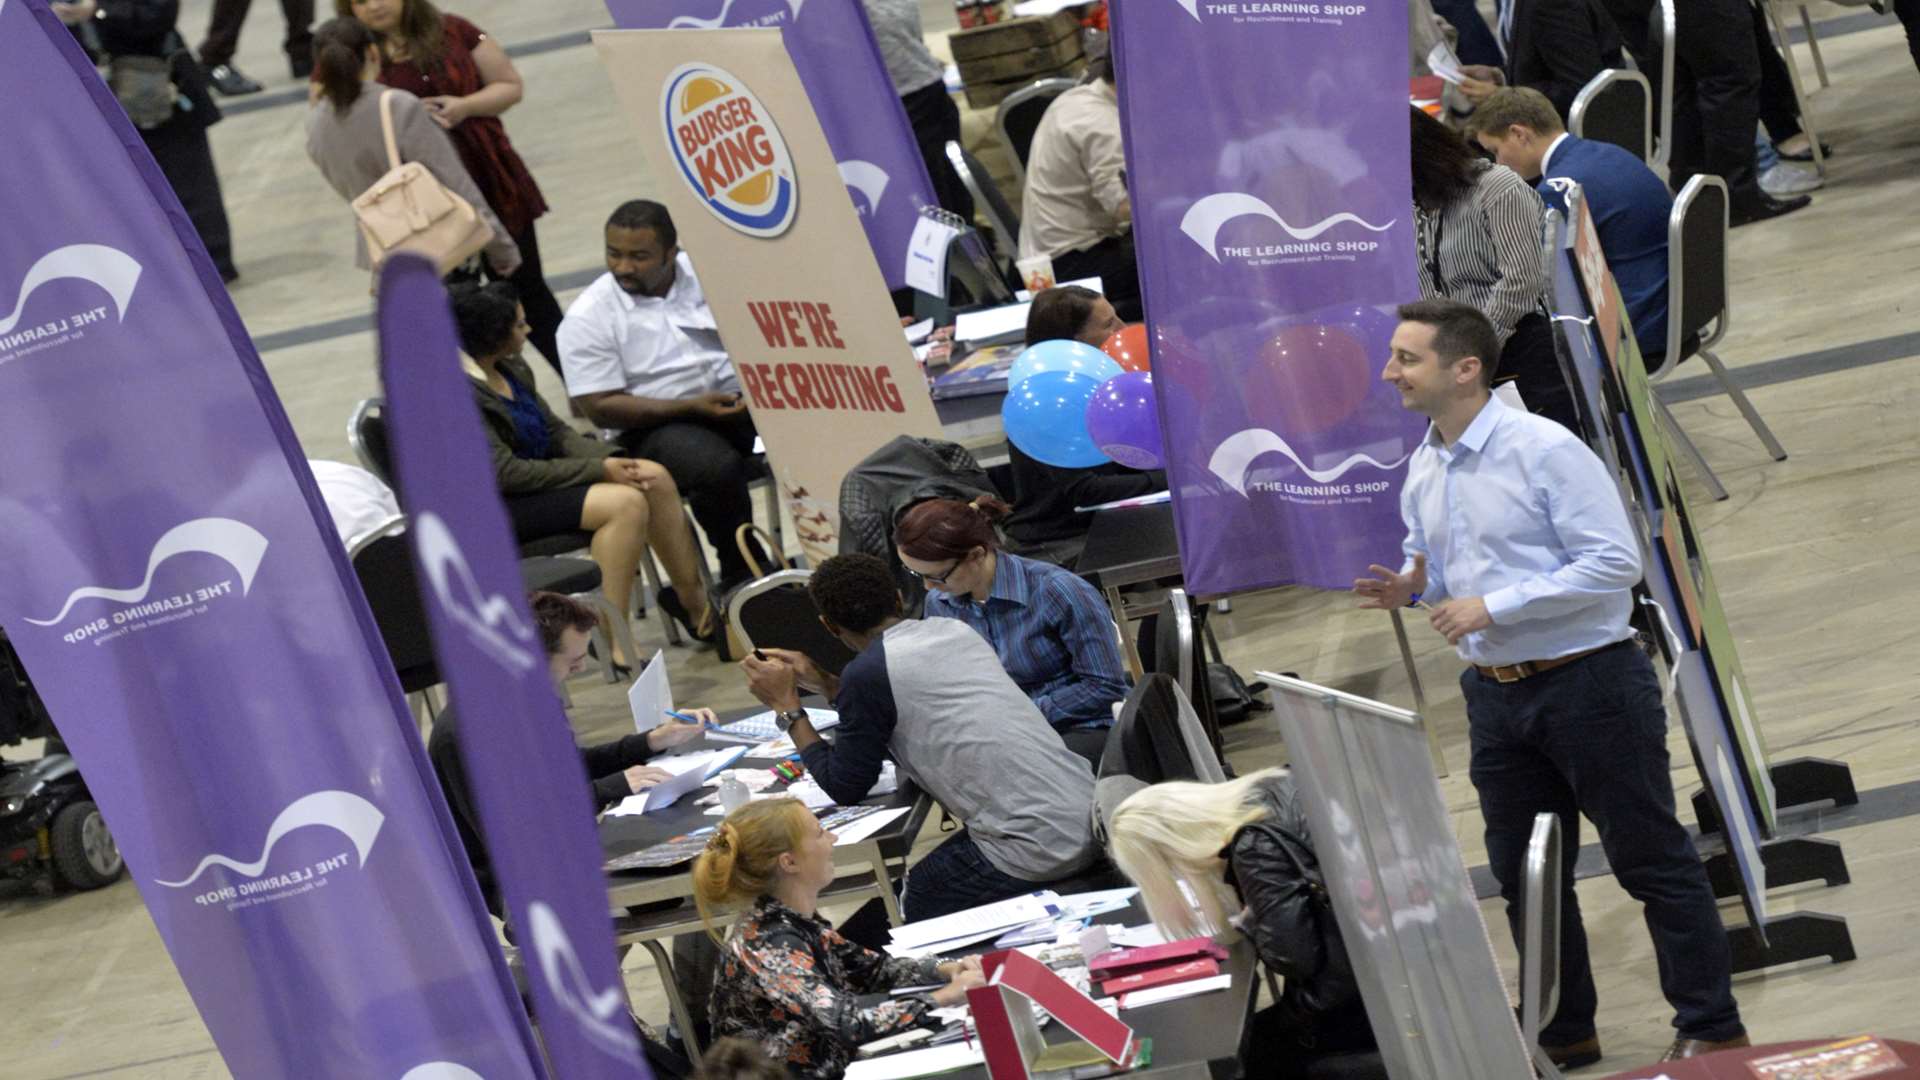 More than 5,000 people attended the Bluewater jobs fair